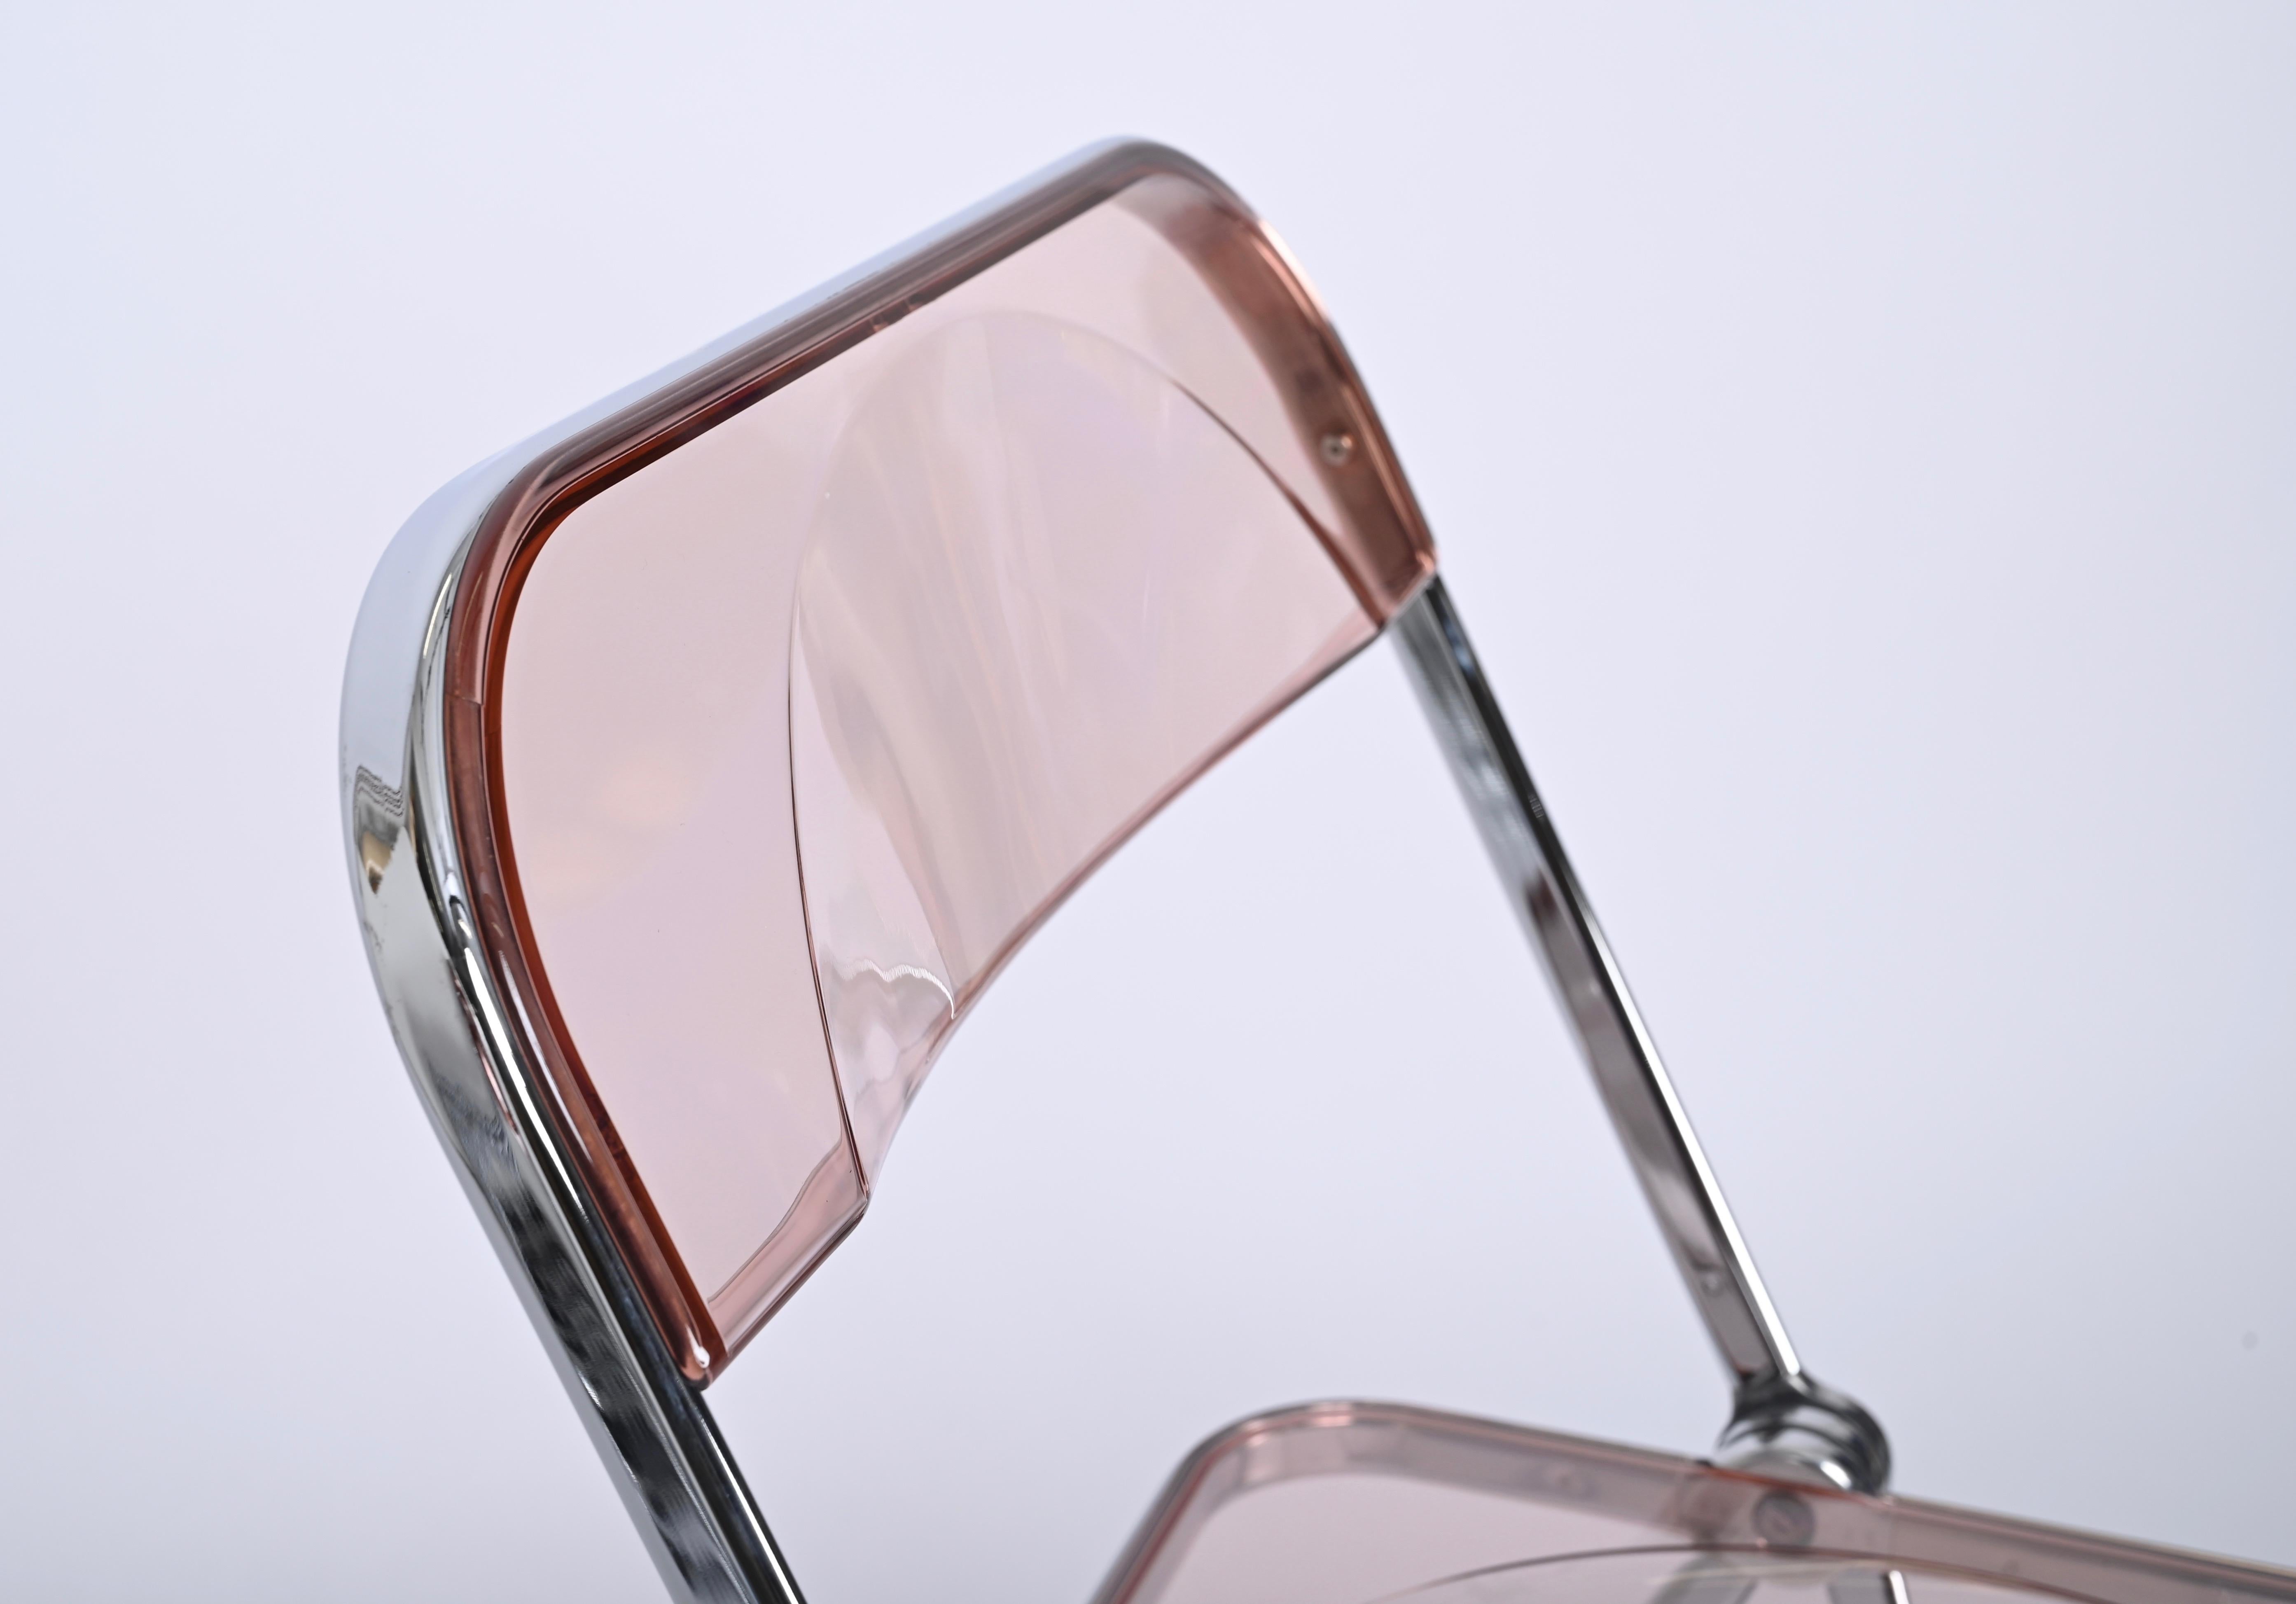 Set of 4 Lucite Pink and Chrome Plia Chairs, Piretti for Castelli, Italy 1970s For Sale 2